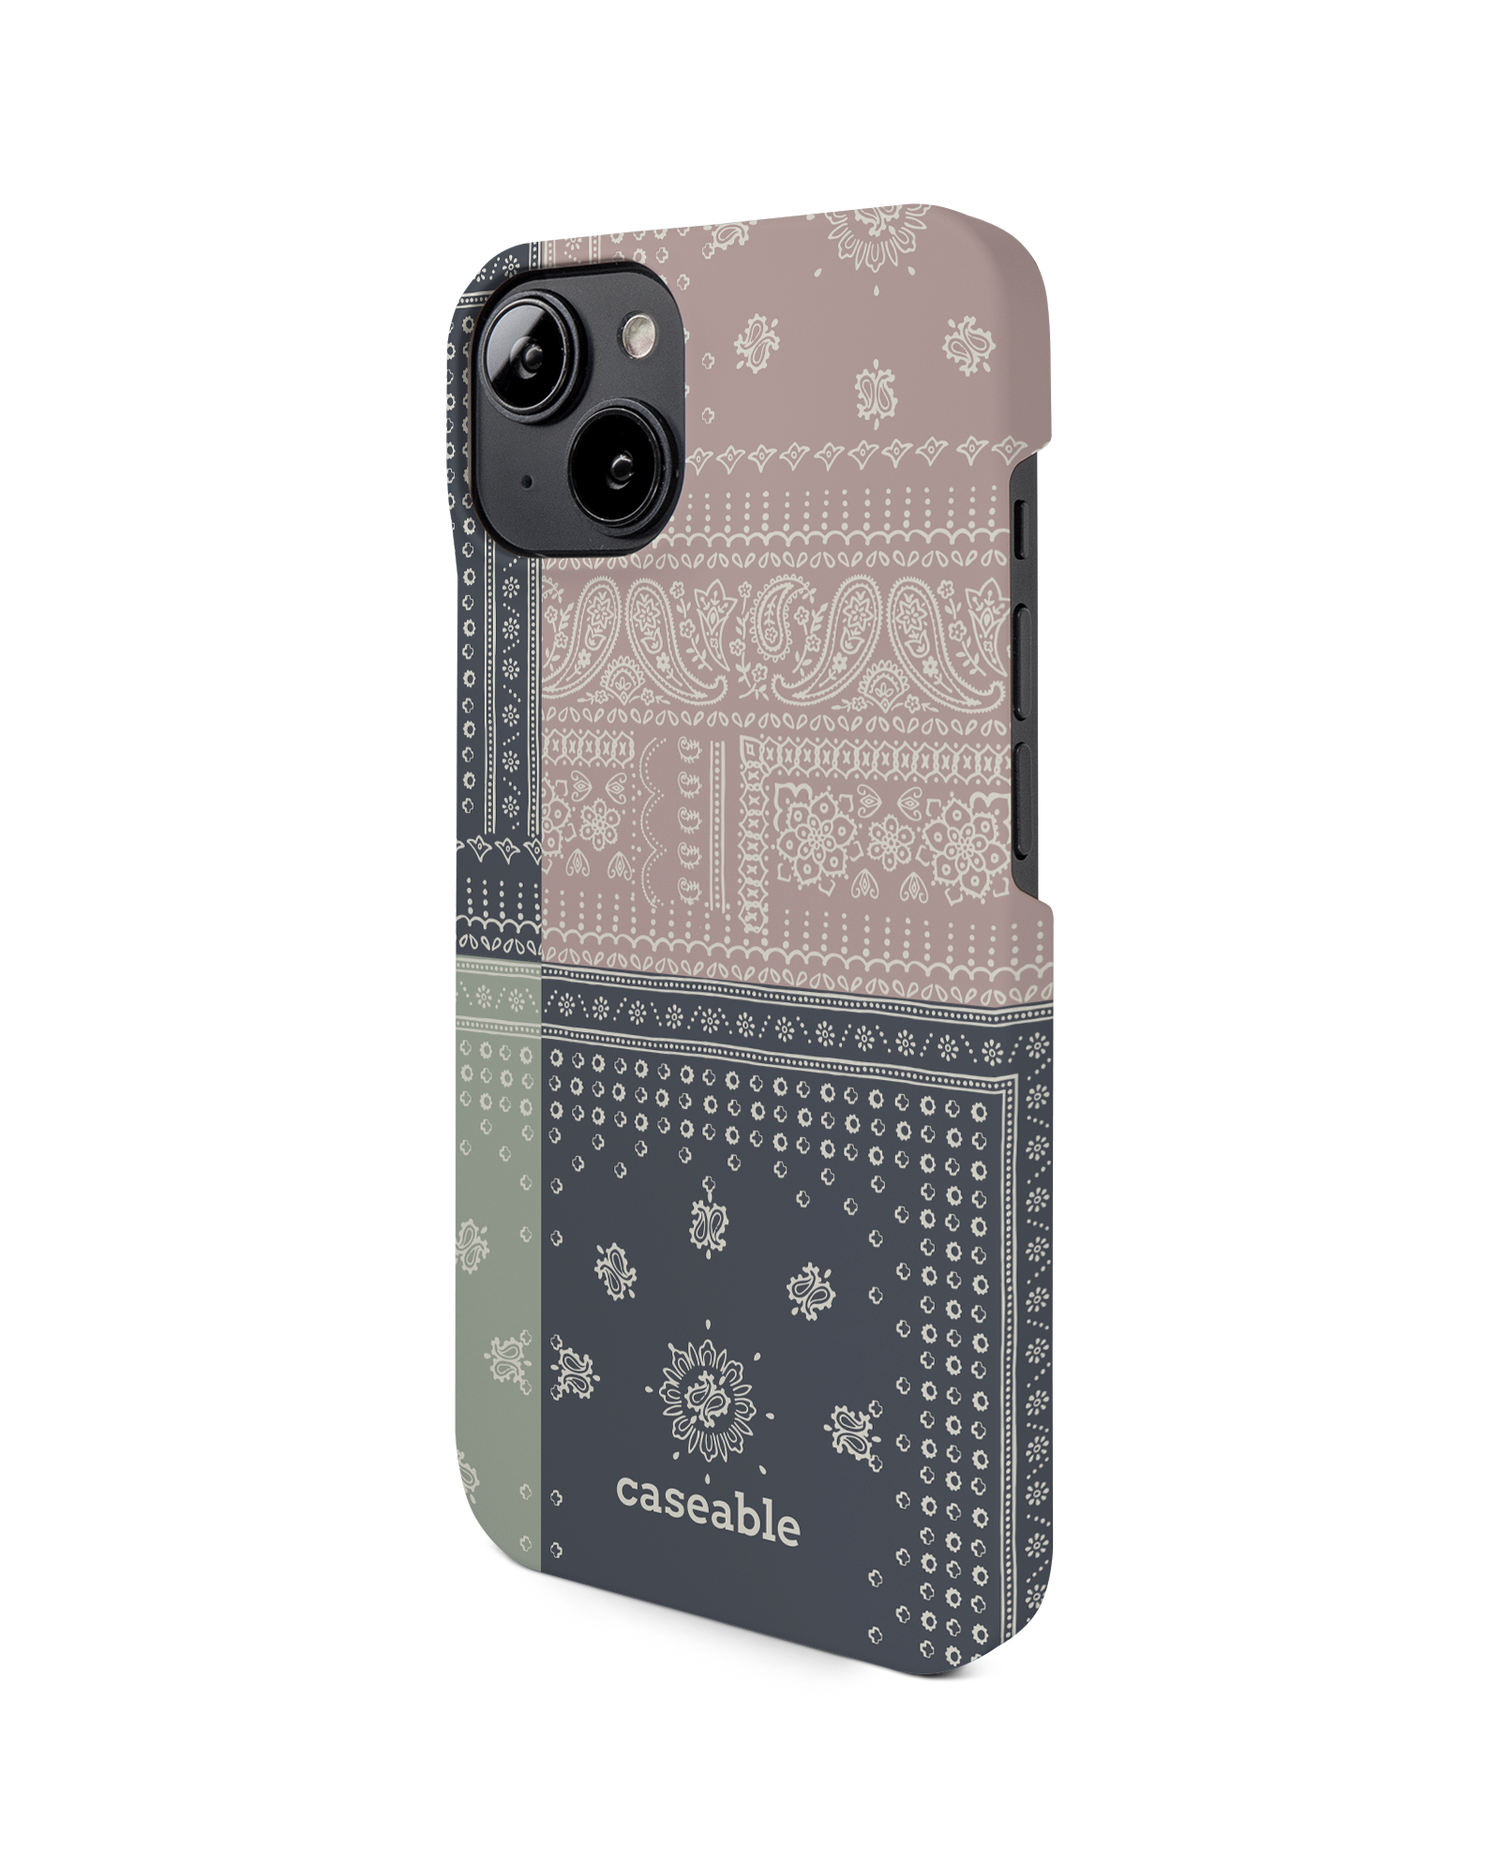 Bandana Patchwork Hard Shell Phone Case for Apple iPhone 14: View from the right side